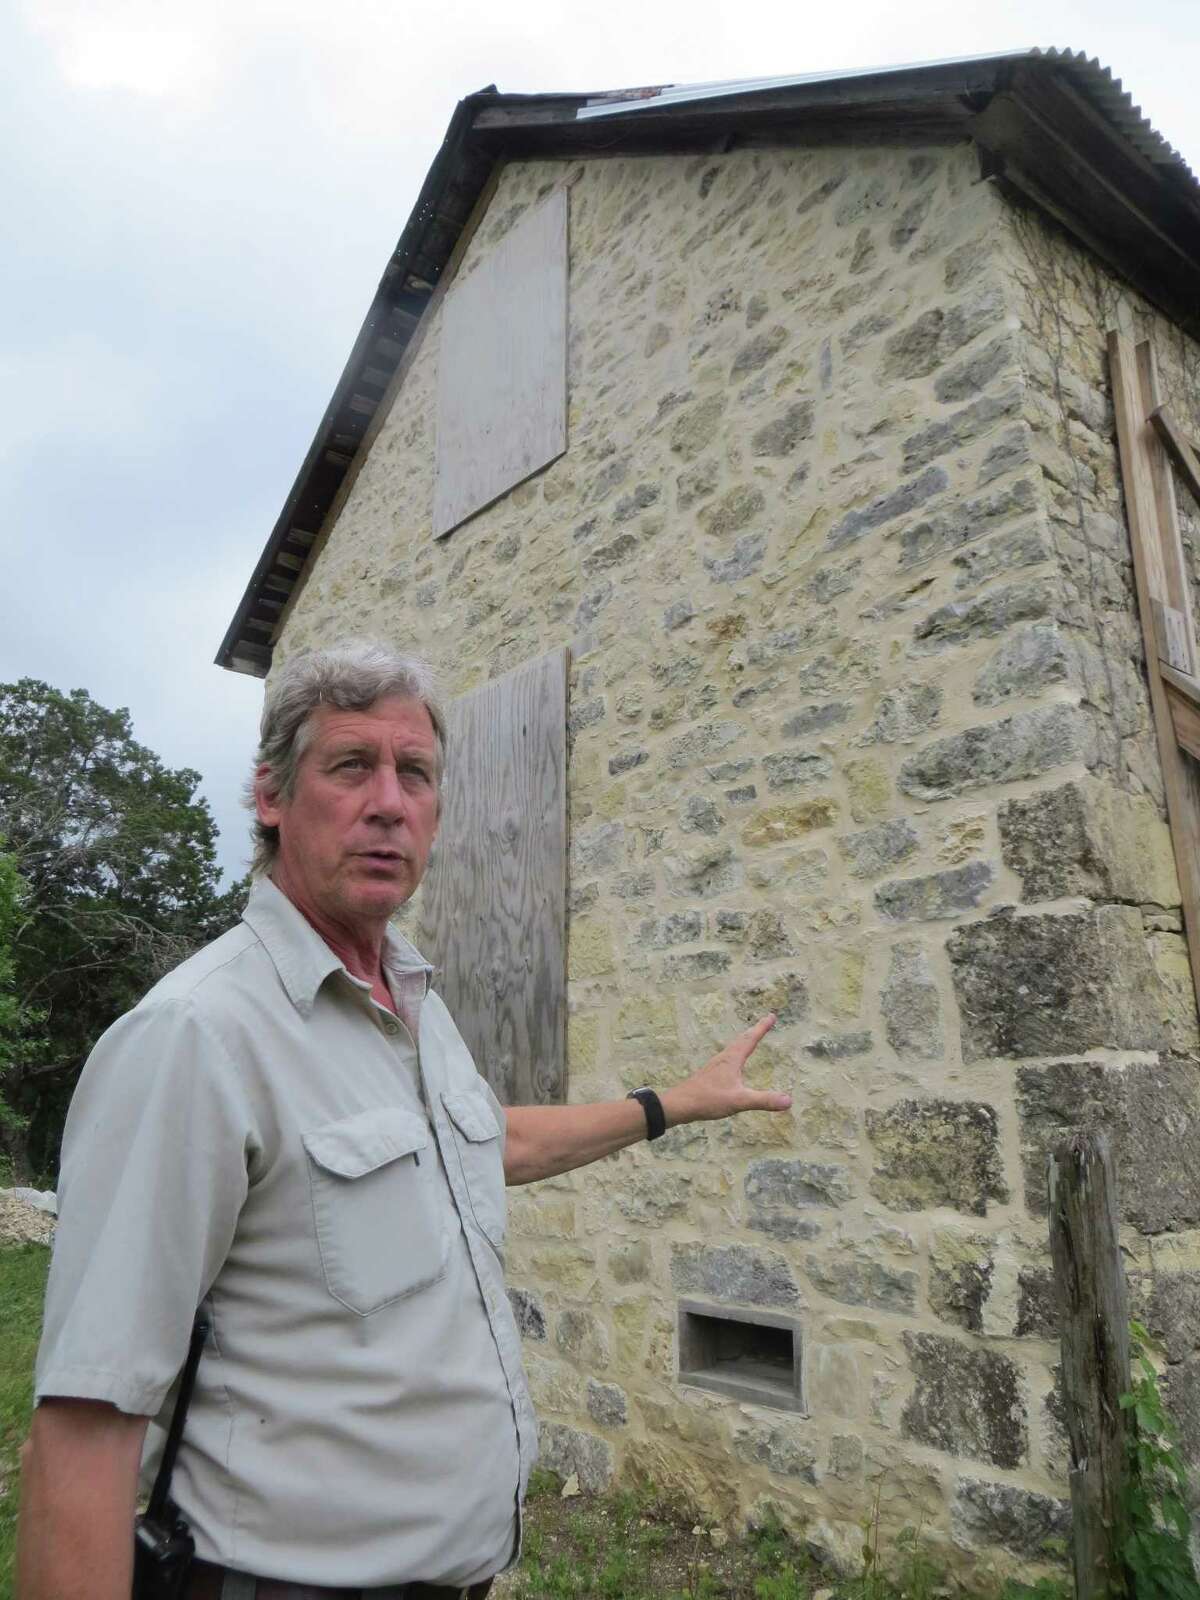 Park Ranger John Koepke shows where masonry repairs were recently made to a crumbling wall on the Zizelmann House, located in Government Canyon State Natural Area.